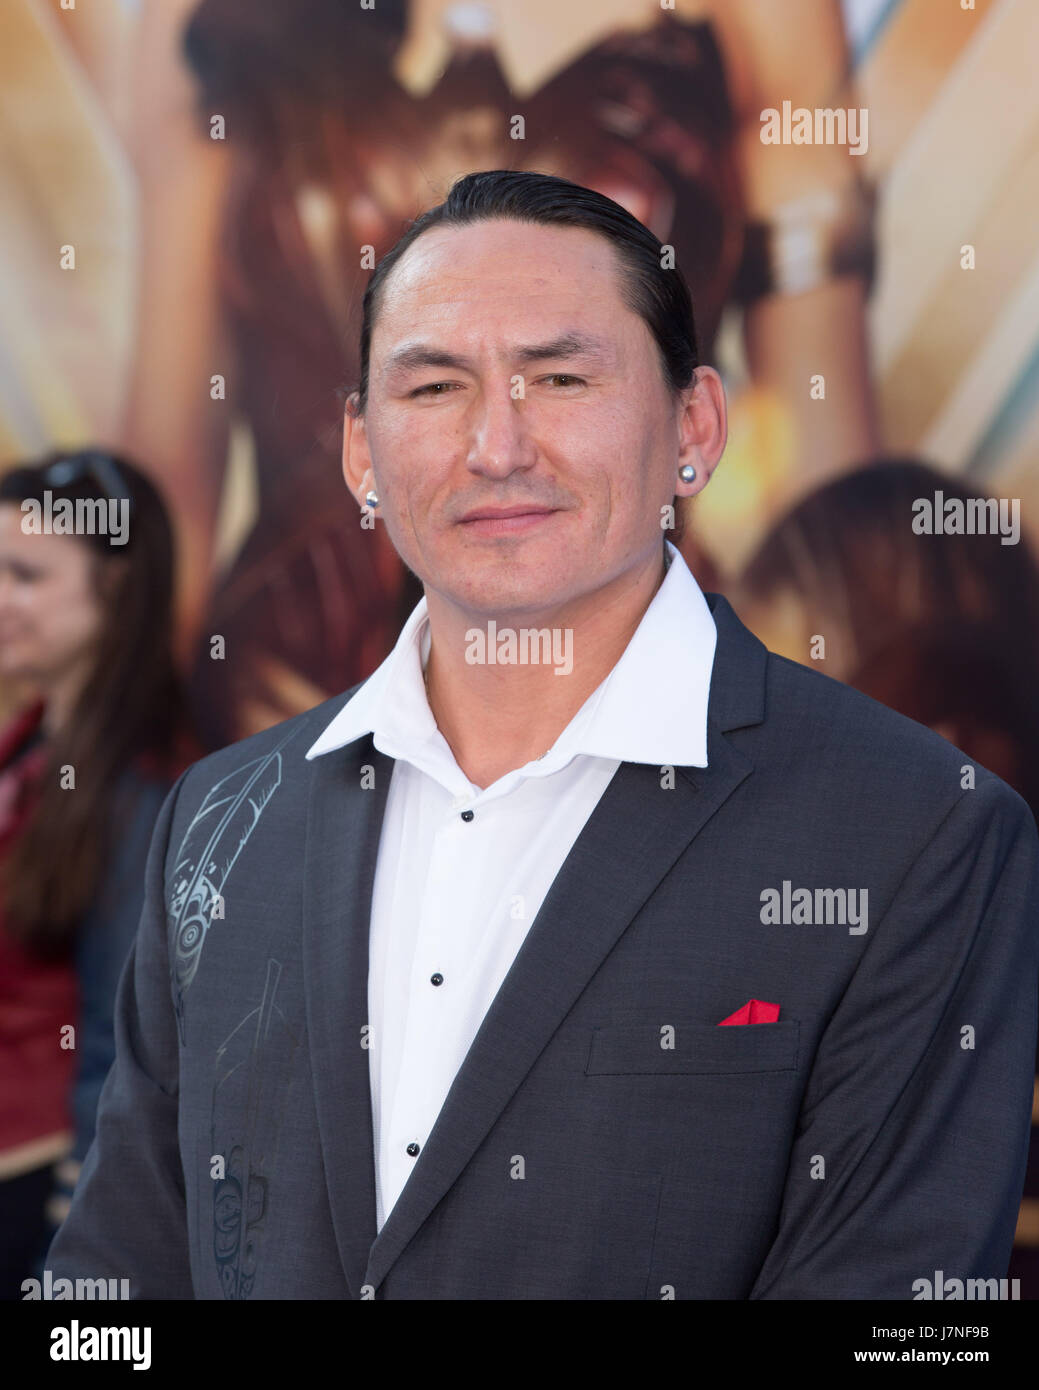 Hollywood, California, USA. 25th May, 2017. Eugene Brave Rock attends the Premiere of Warner Bros. Pictures' 'Wonder Woman' at the Pantages Theatre on May 25, 2017 in Hollywood, California. Credit: The Photo Access/Alamy Live News Stock Photo